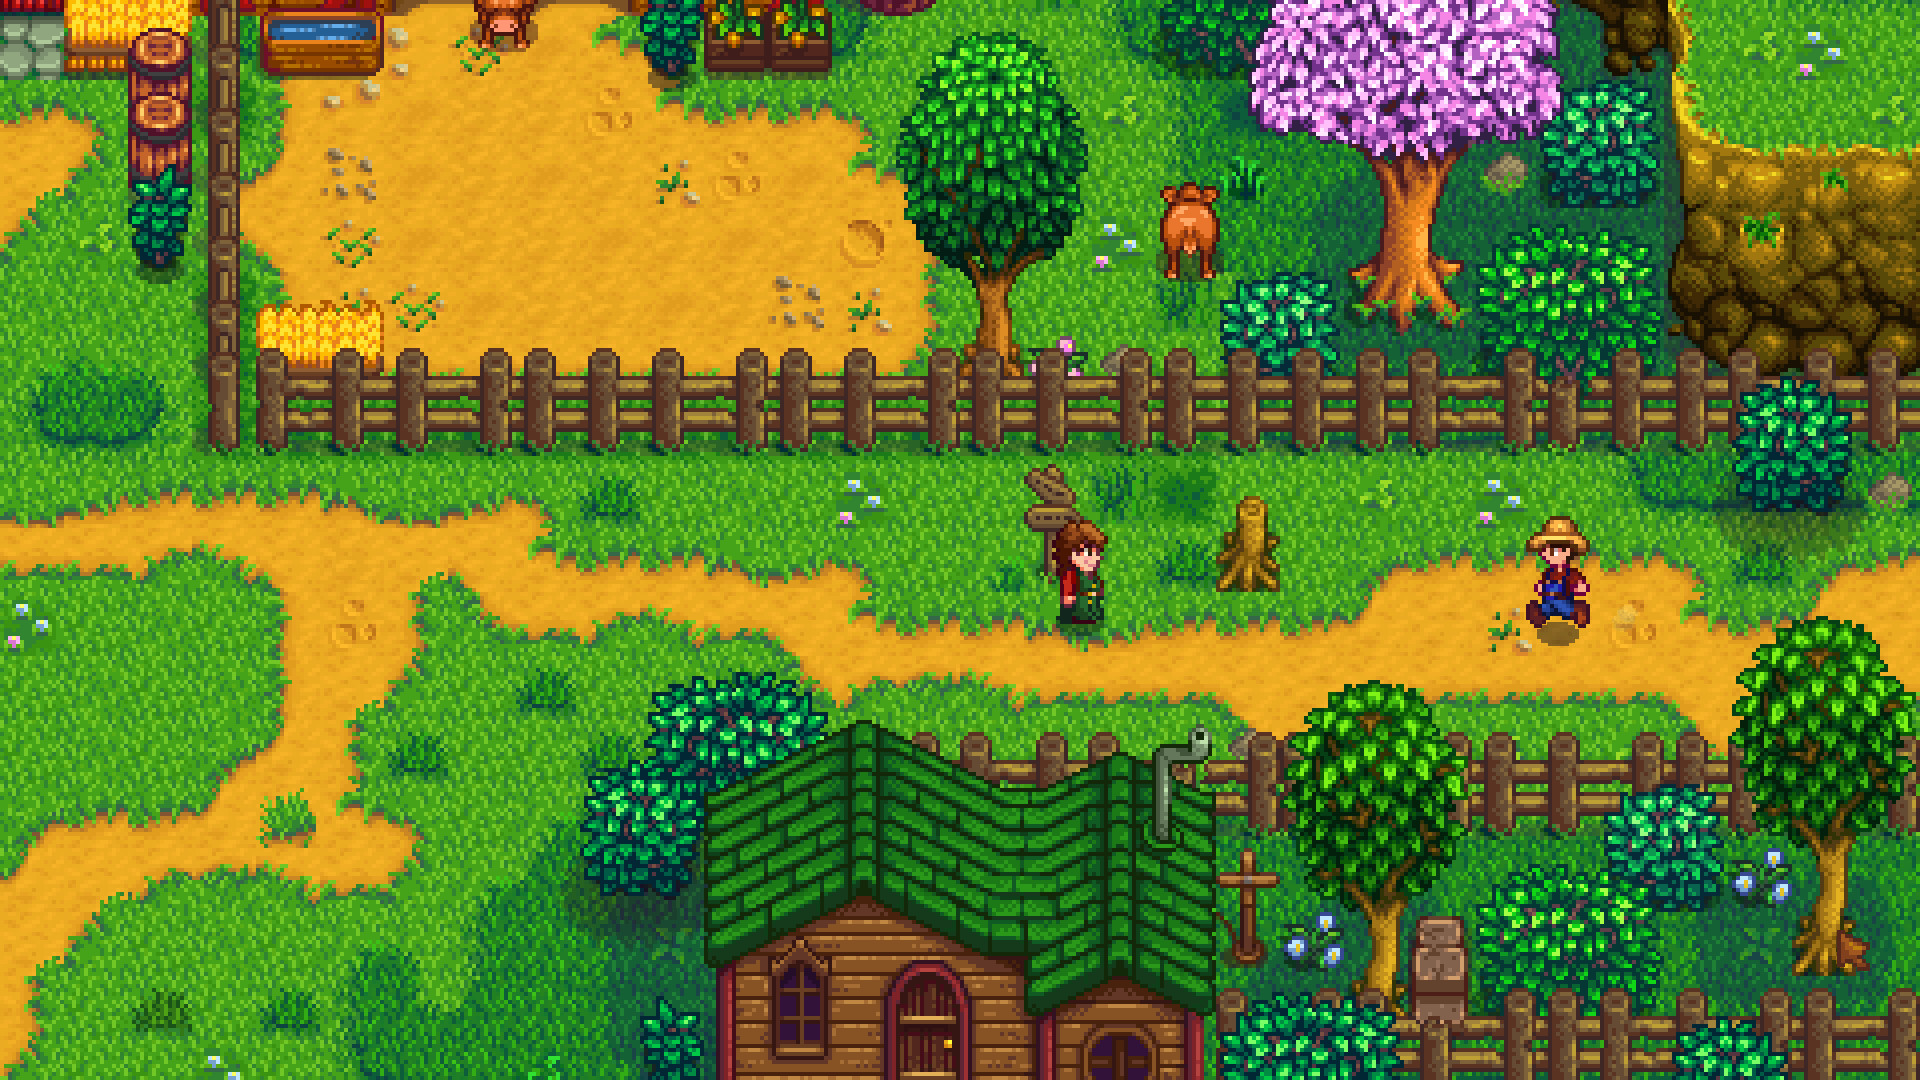 Stardew Valley 1.5.5 improves mod support, and “there may be new content in 1.5.6”